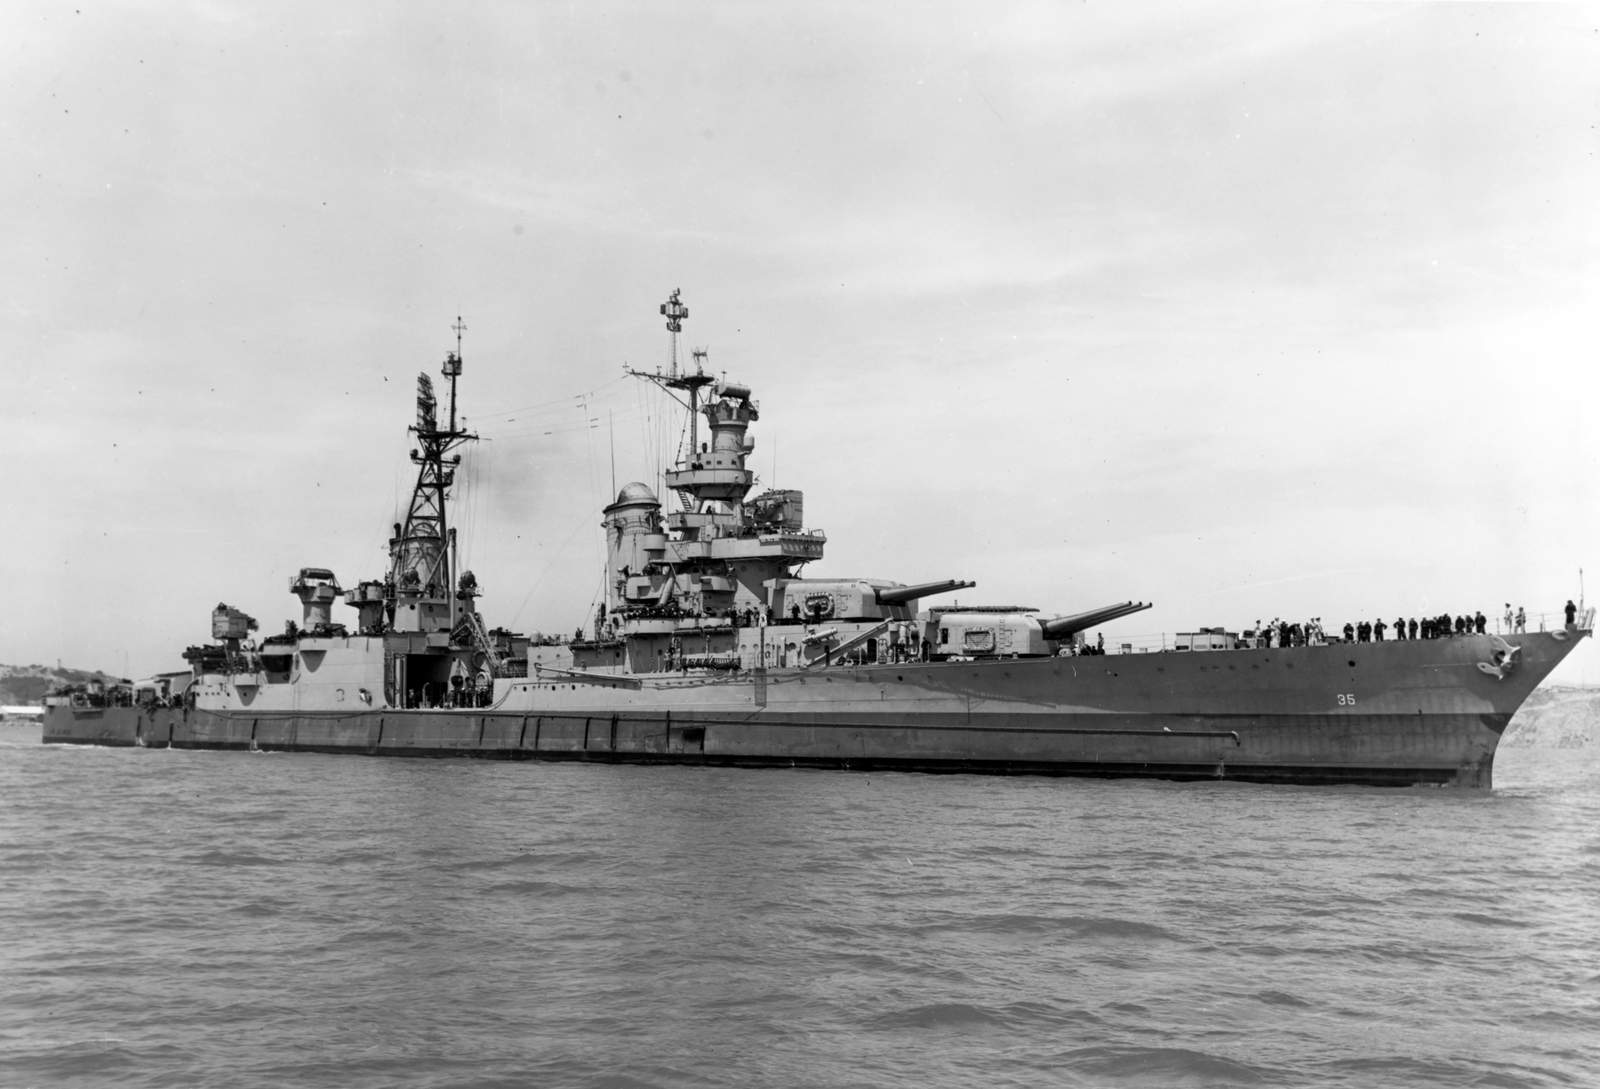 Congress awards its highest honor to USS Indianapolis crew